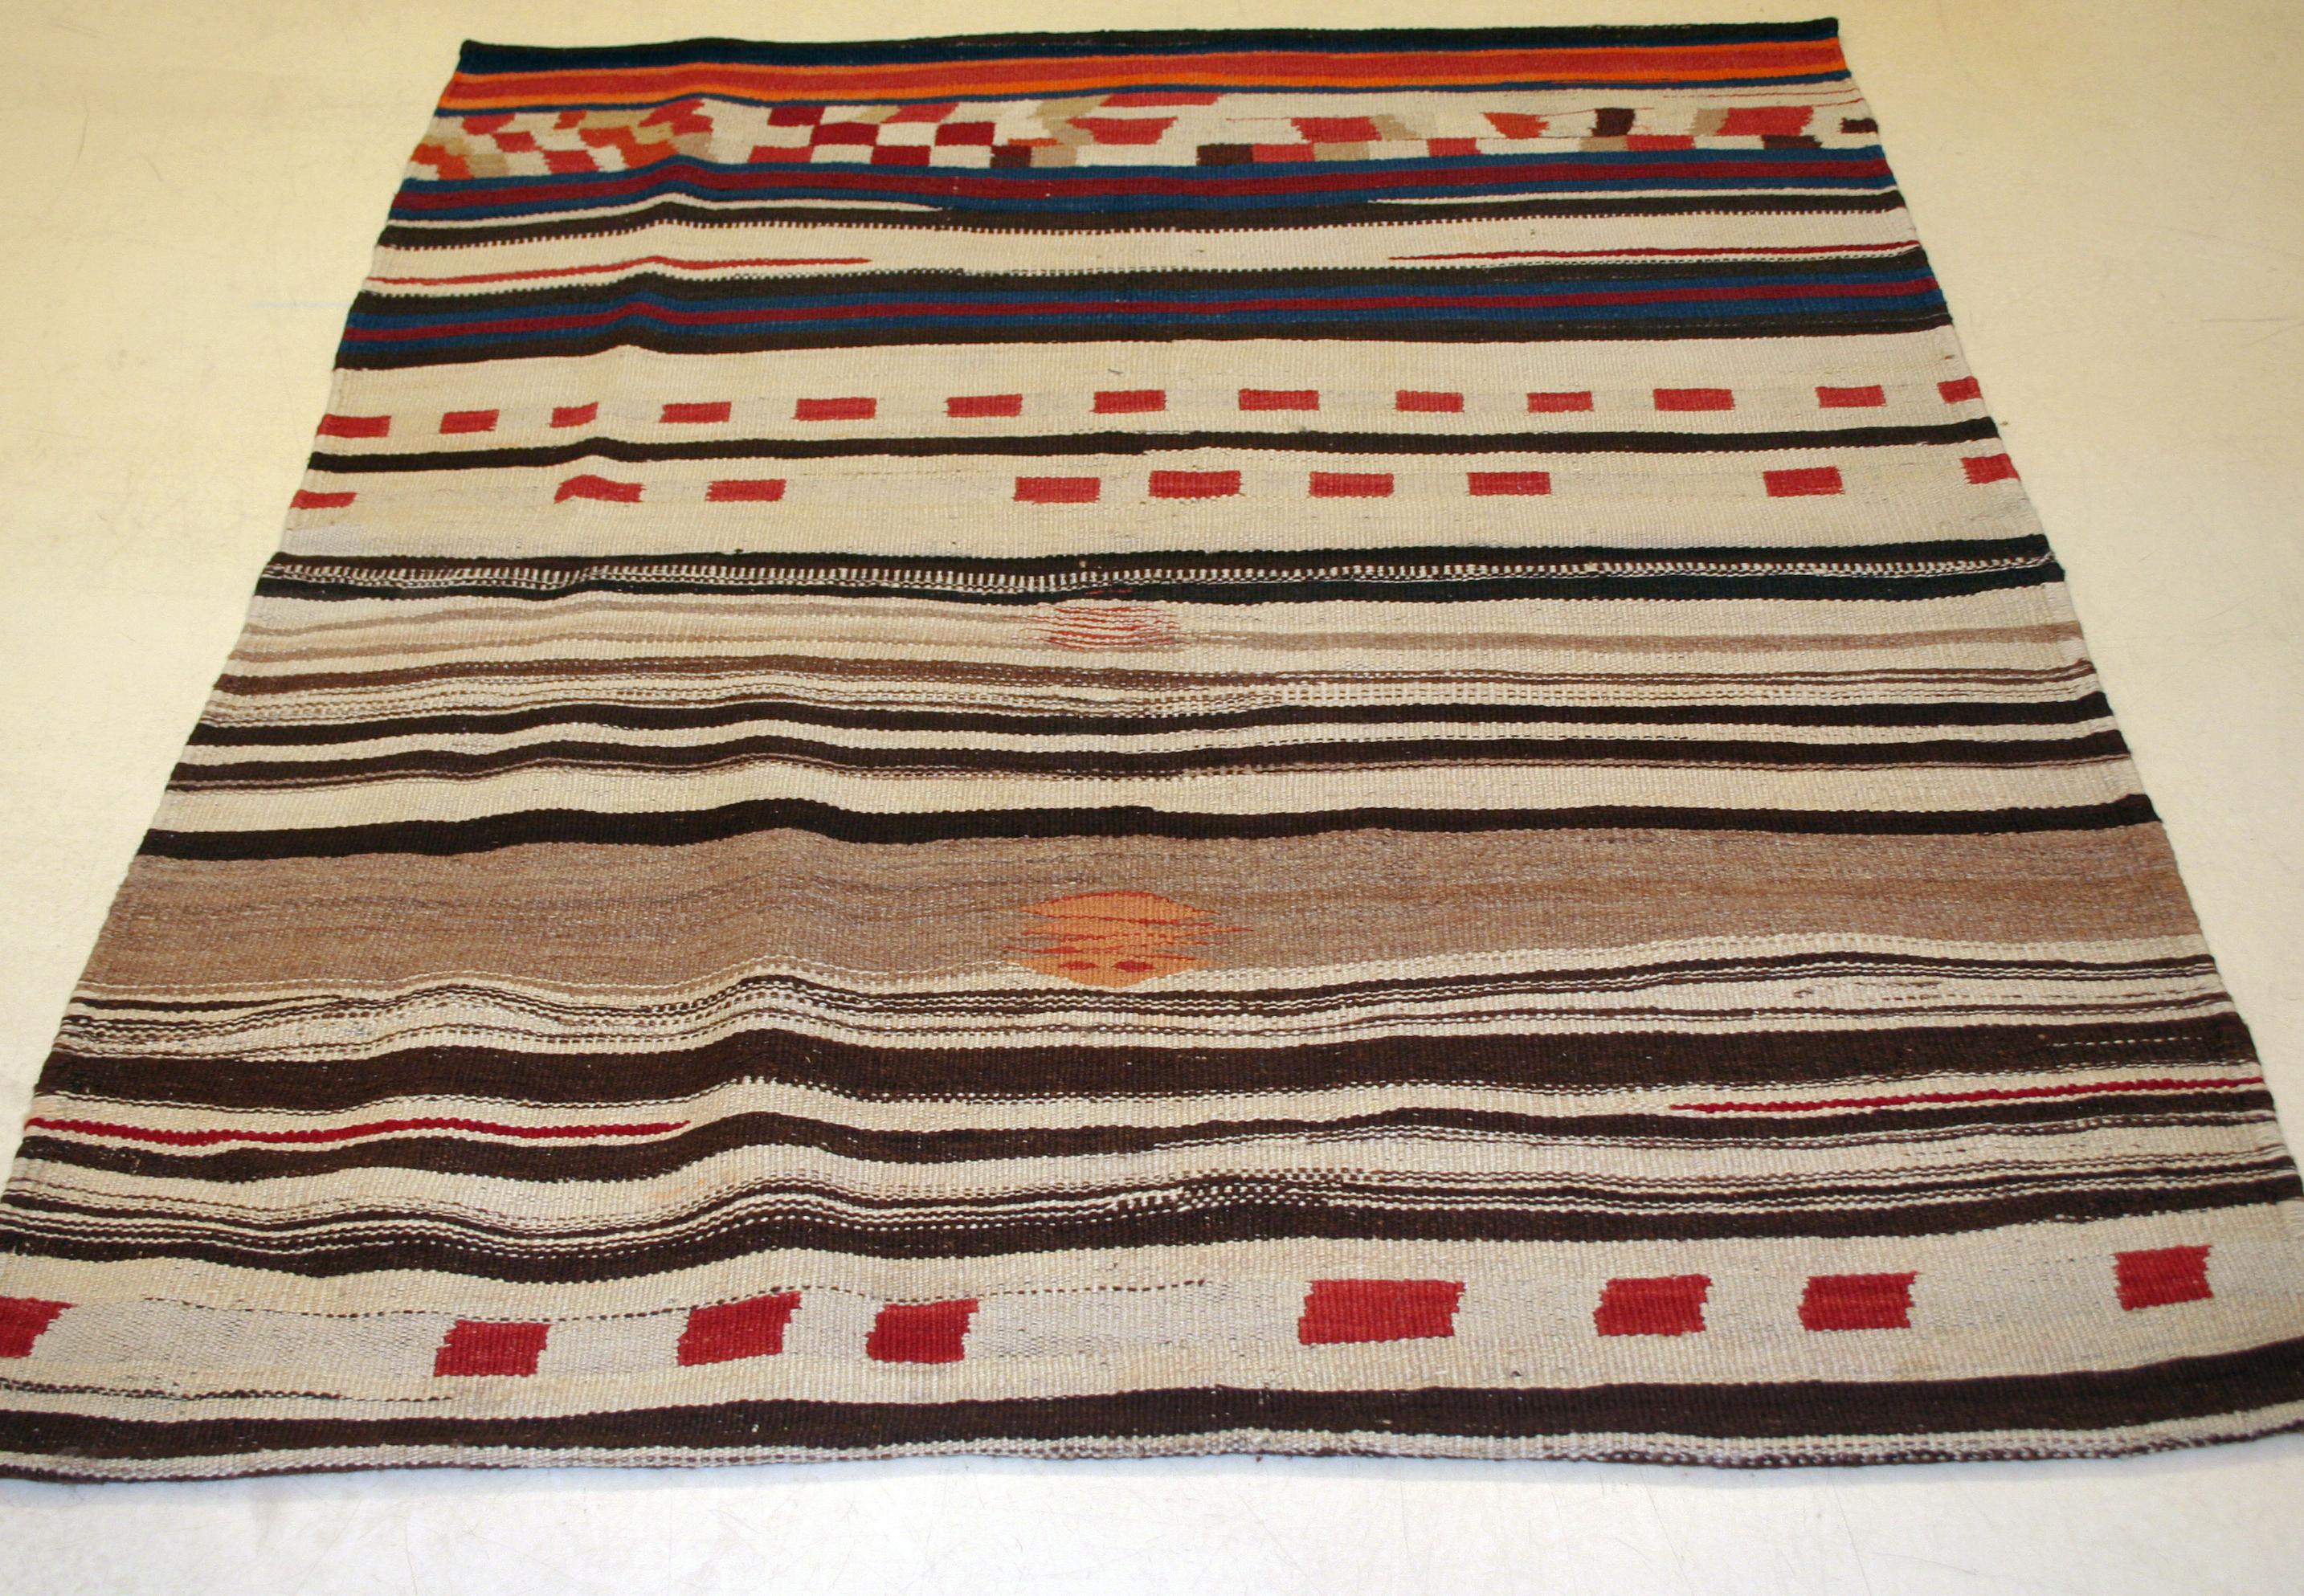 Sofreh flatweaves are among the most prized possessions among the material culture of near eastern tribal people. These are employed as presentation textiles for food offerings when prestigious guests are visiting the tent. This very unusual example